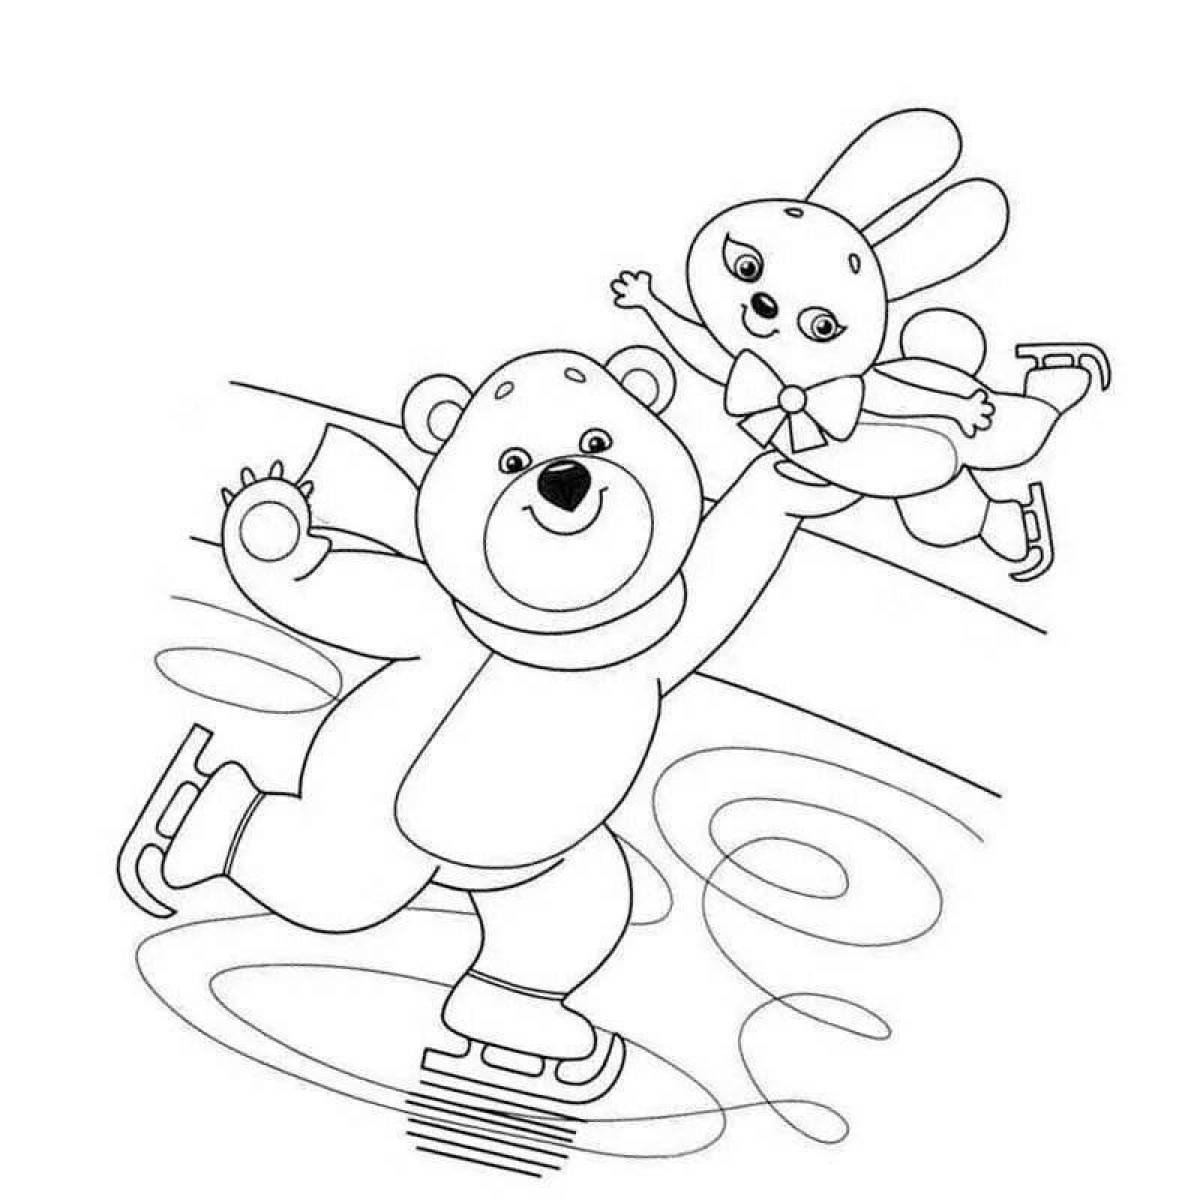 Winter sports coloring pages for kids